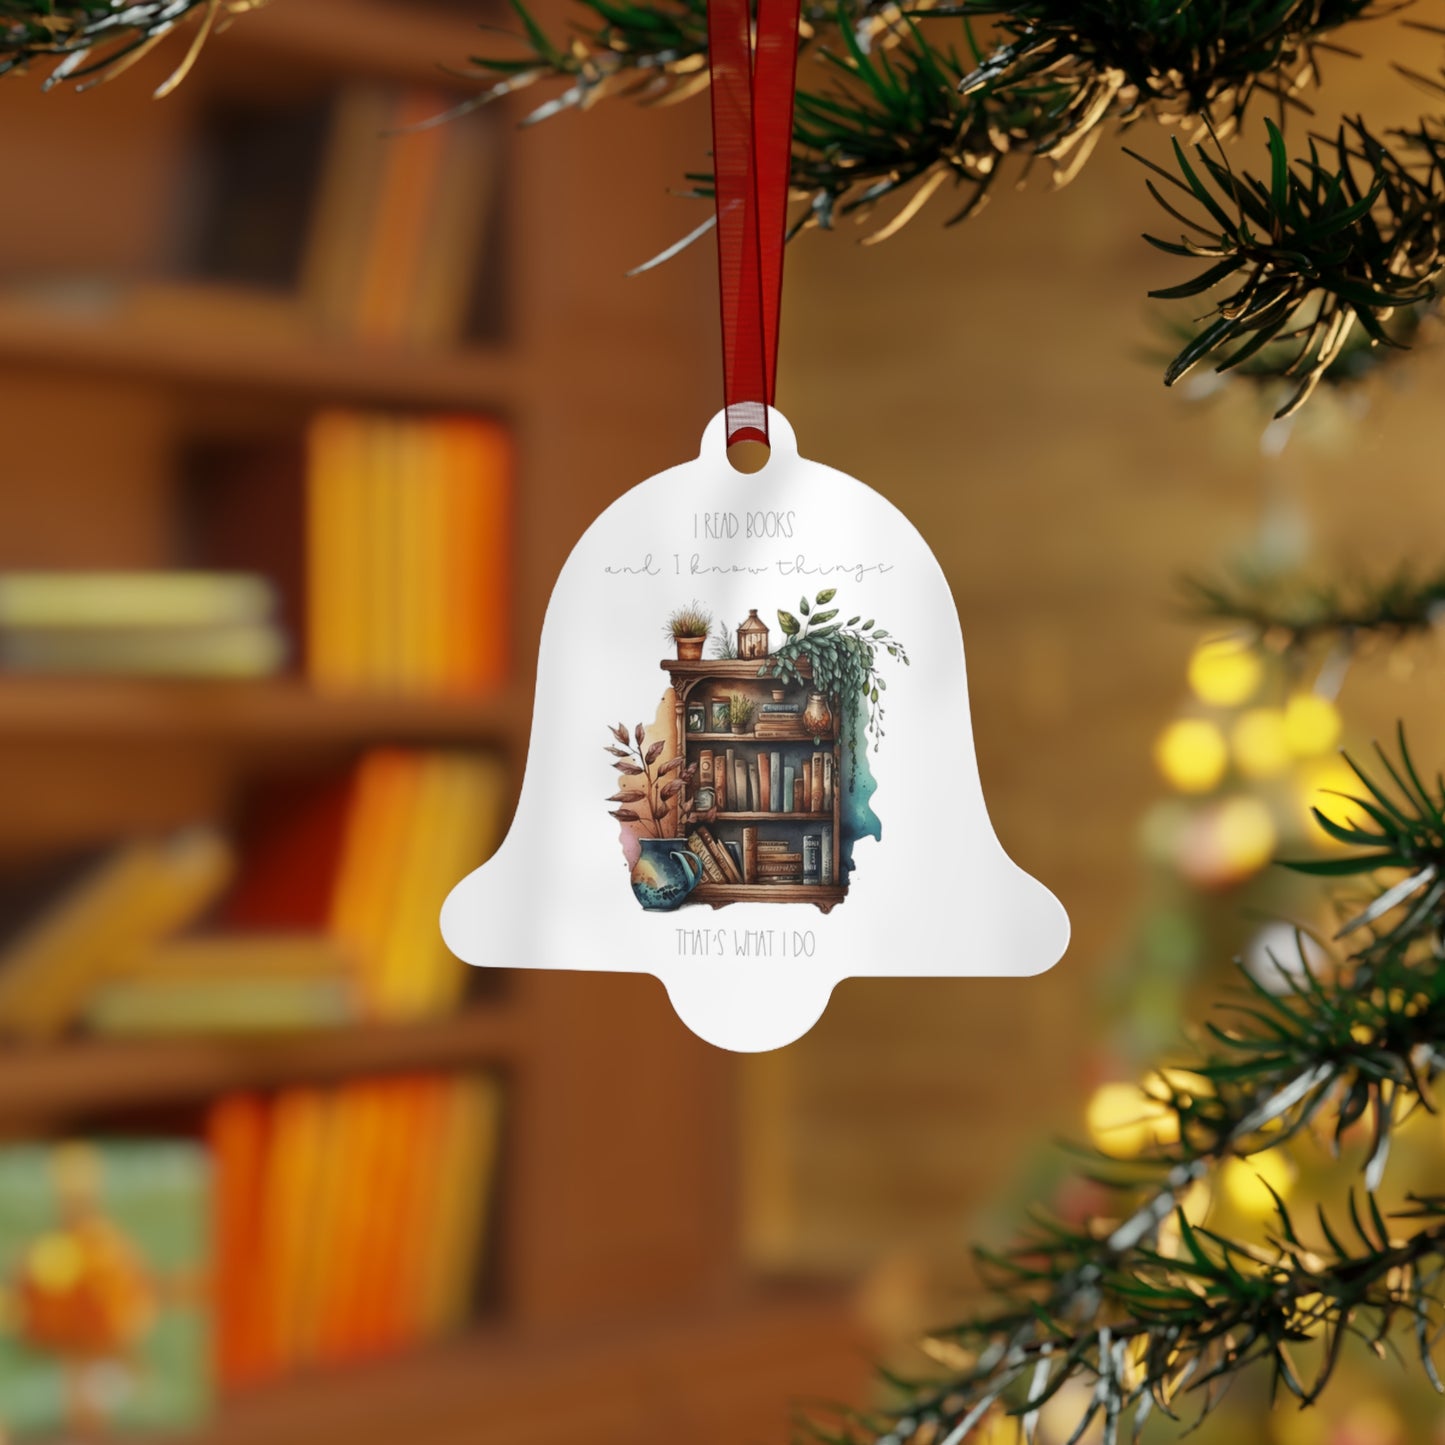 Bell Metal Ornament “I read books and I know things. That’s what I do.”